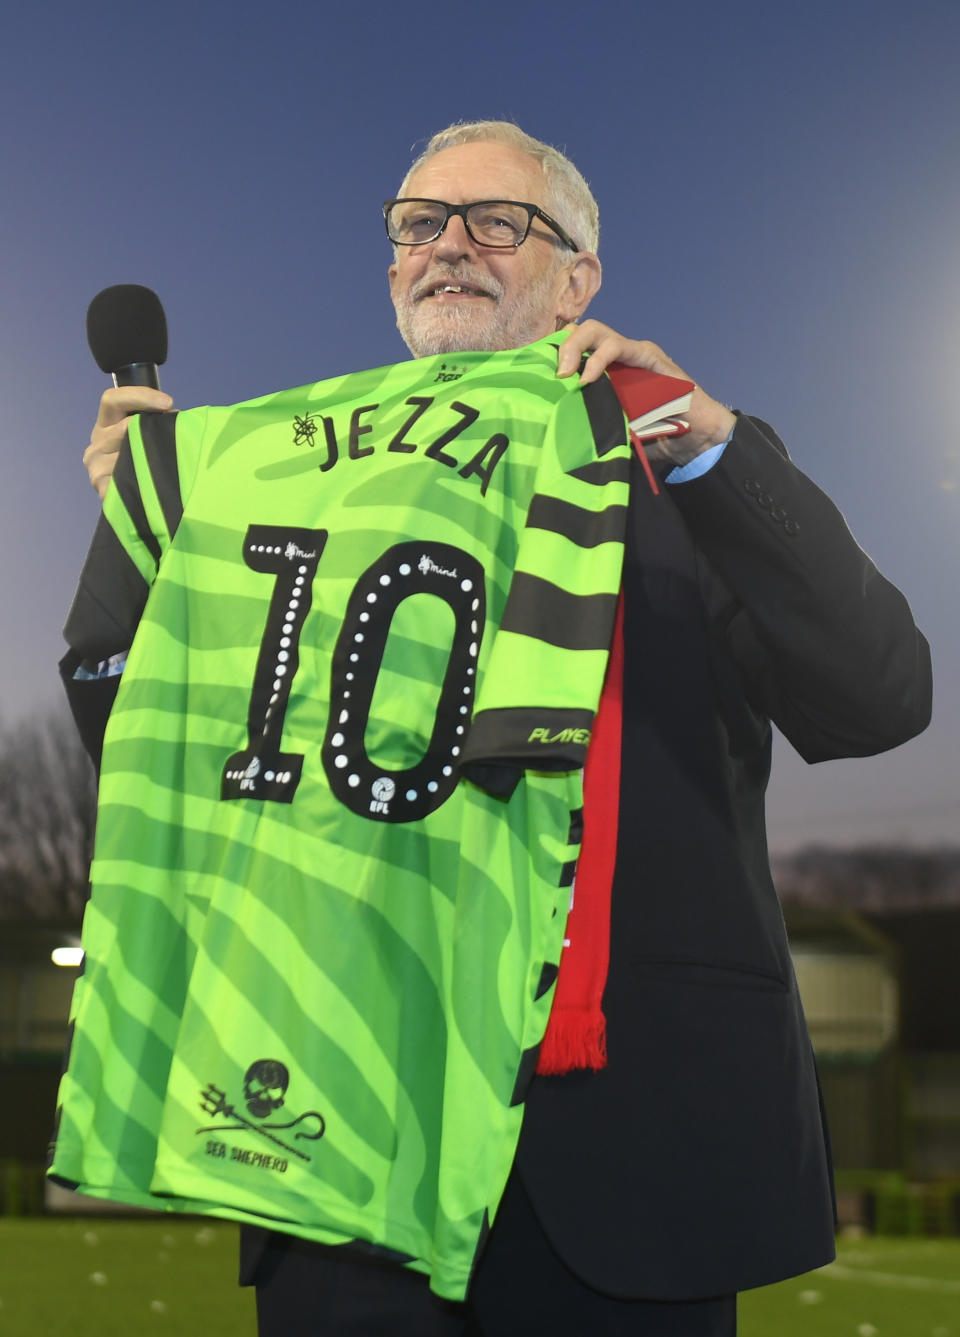 Labour leader Jeremy Corbyn holds a football shirt presented to him at Forest Green Rovers in Nailsworth, Stroud, while on the General Election campaign trail.